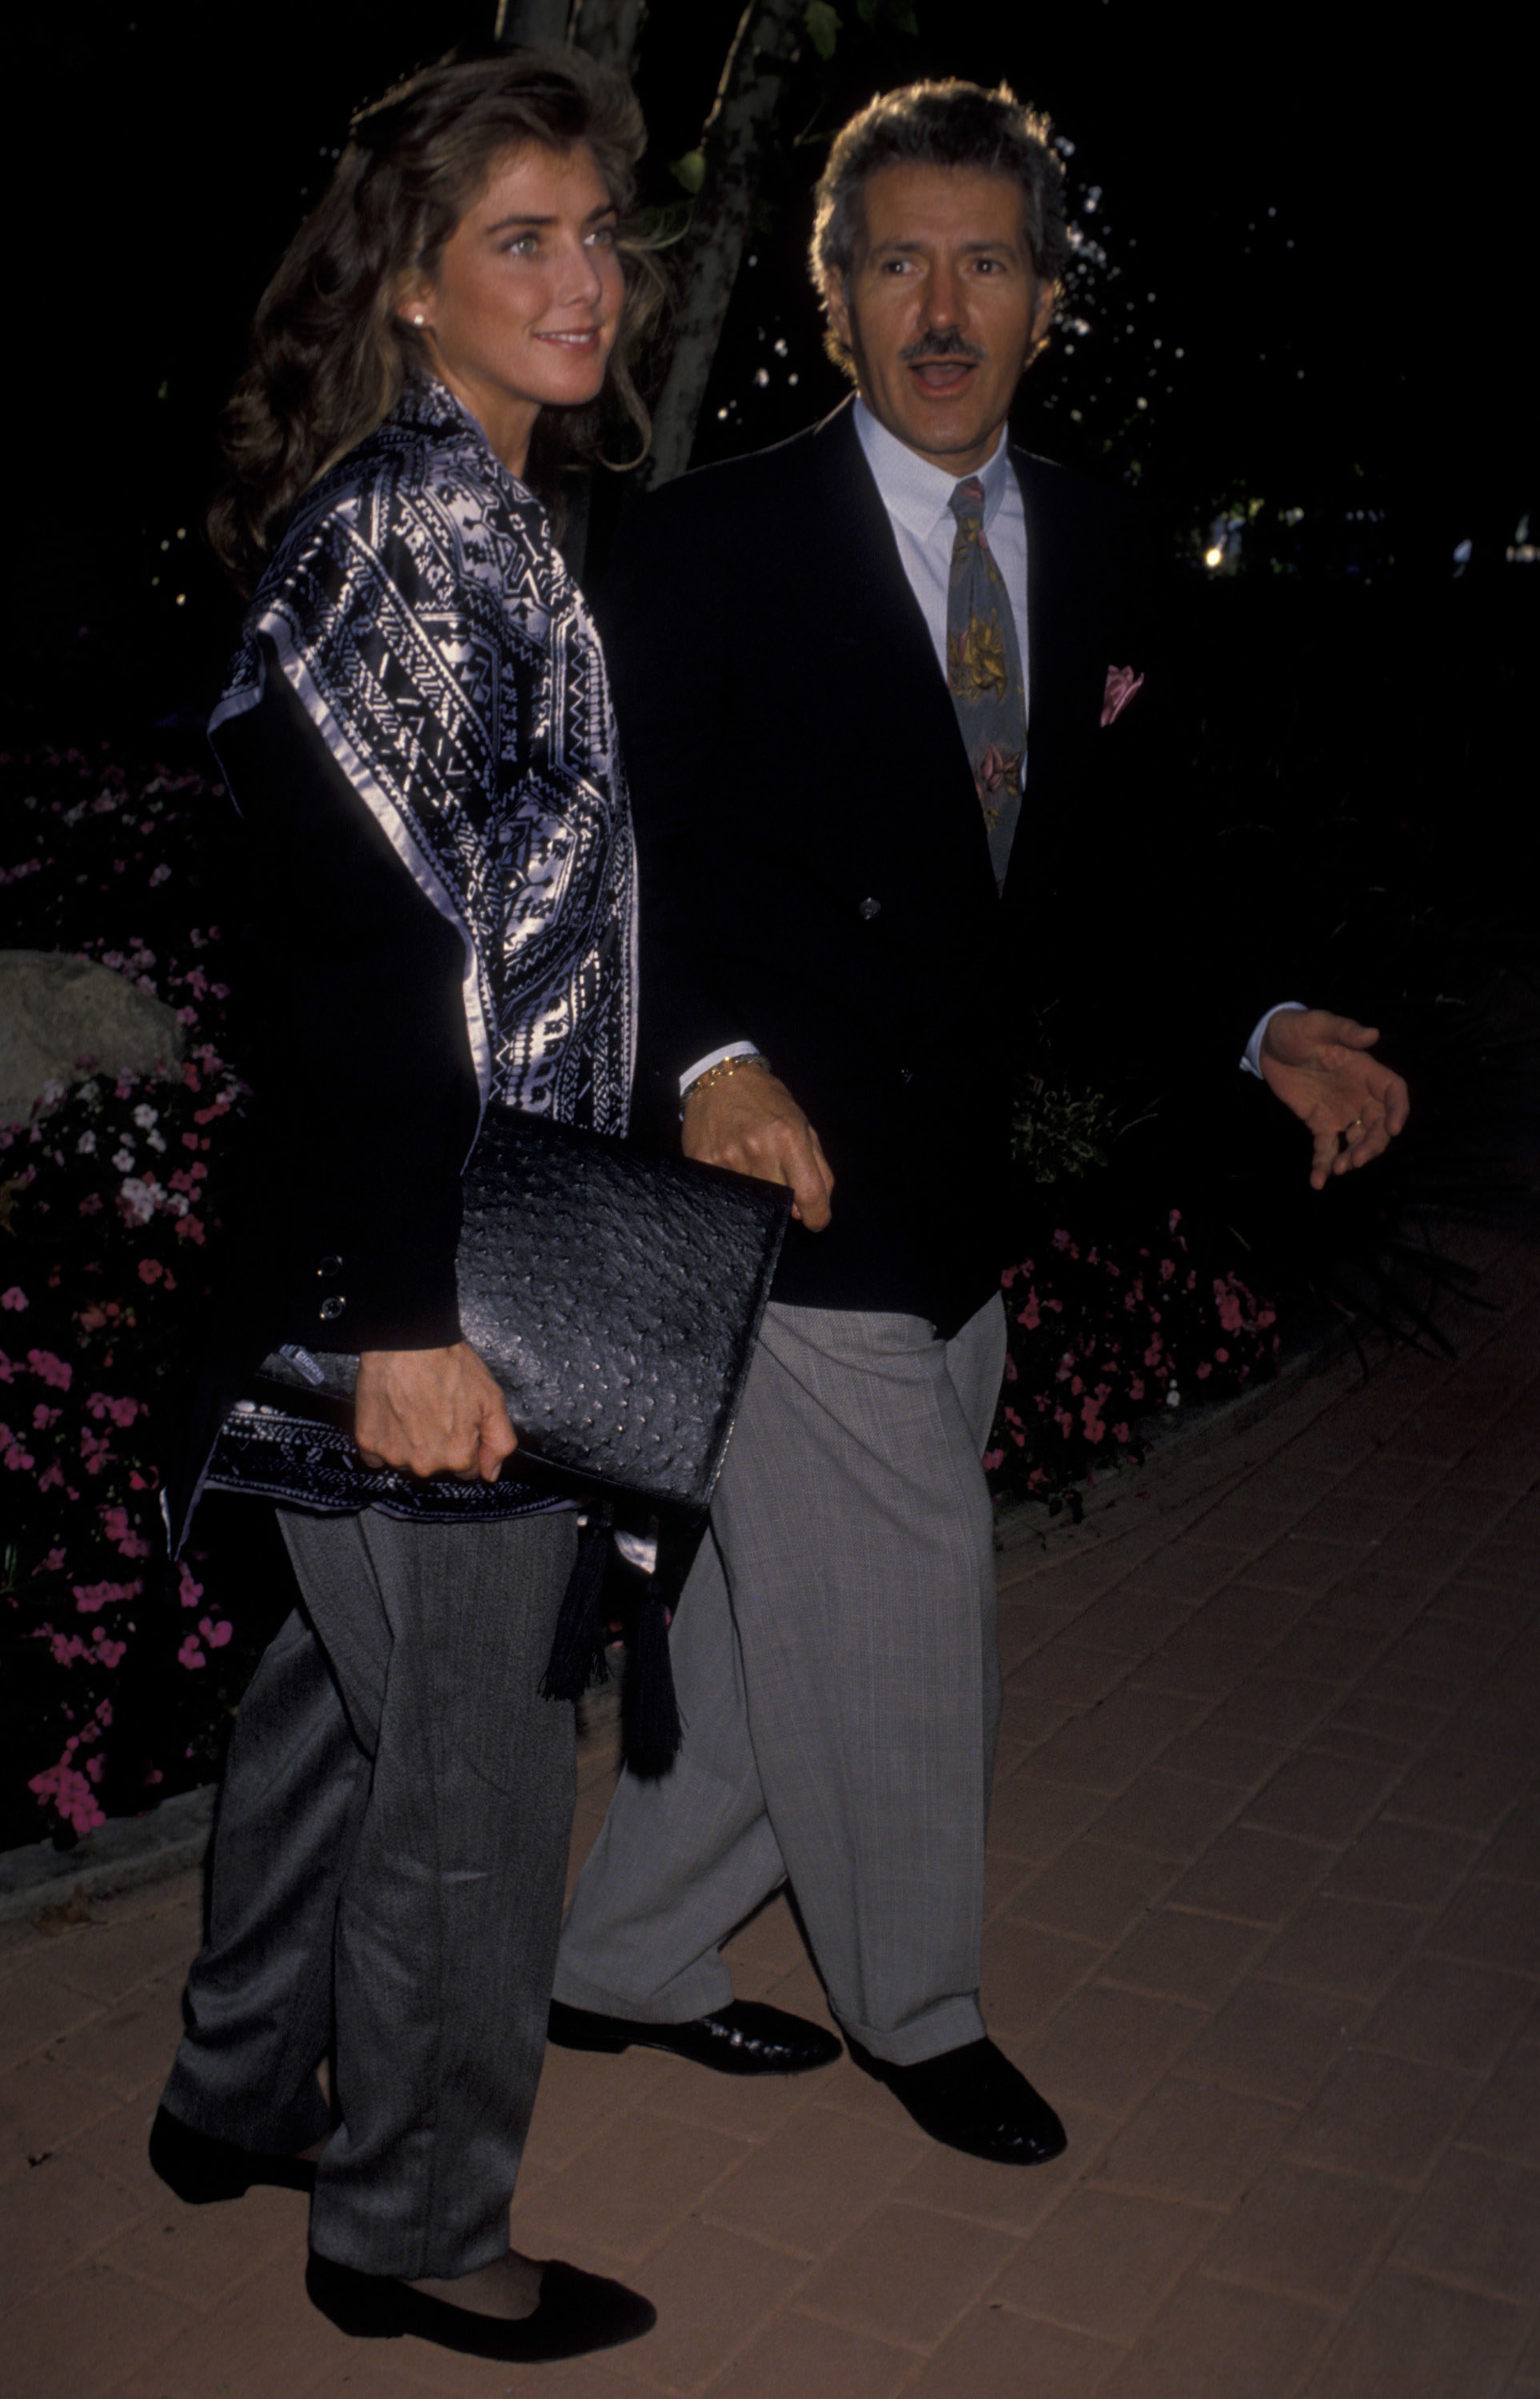 Alex Trebek and wife Jean Currivan attend Hollywood Stars Night Thoroughbred Horse Race on June 22, 1990 at Hollywood Park in Hollywood, California.